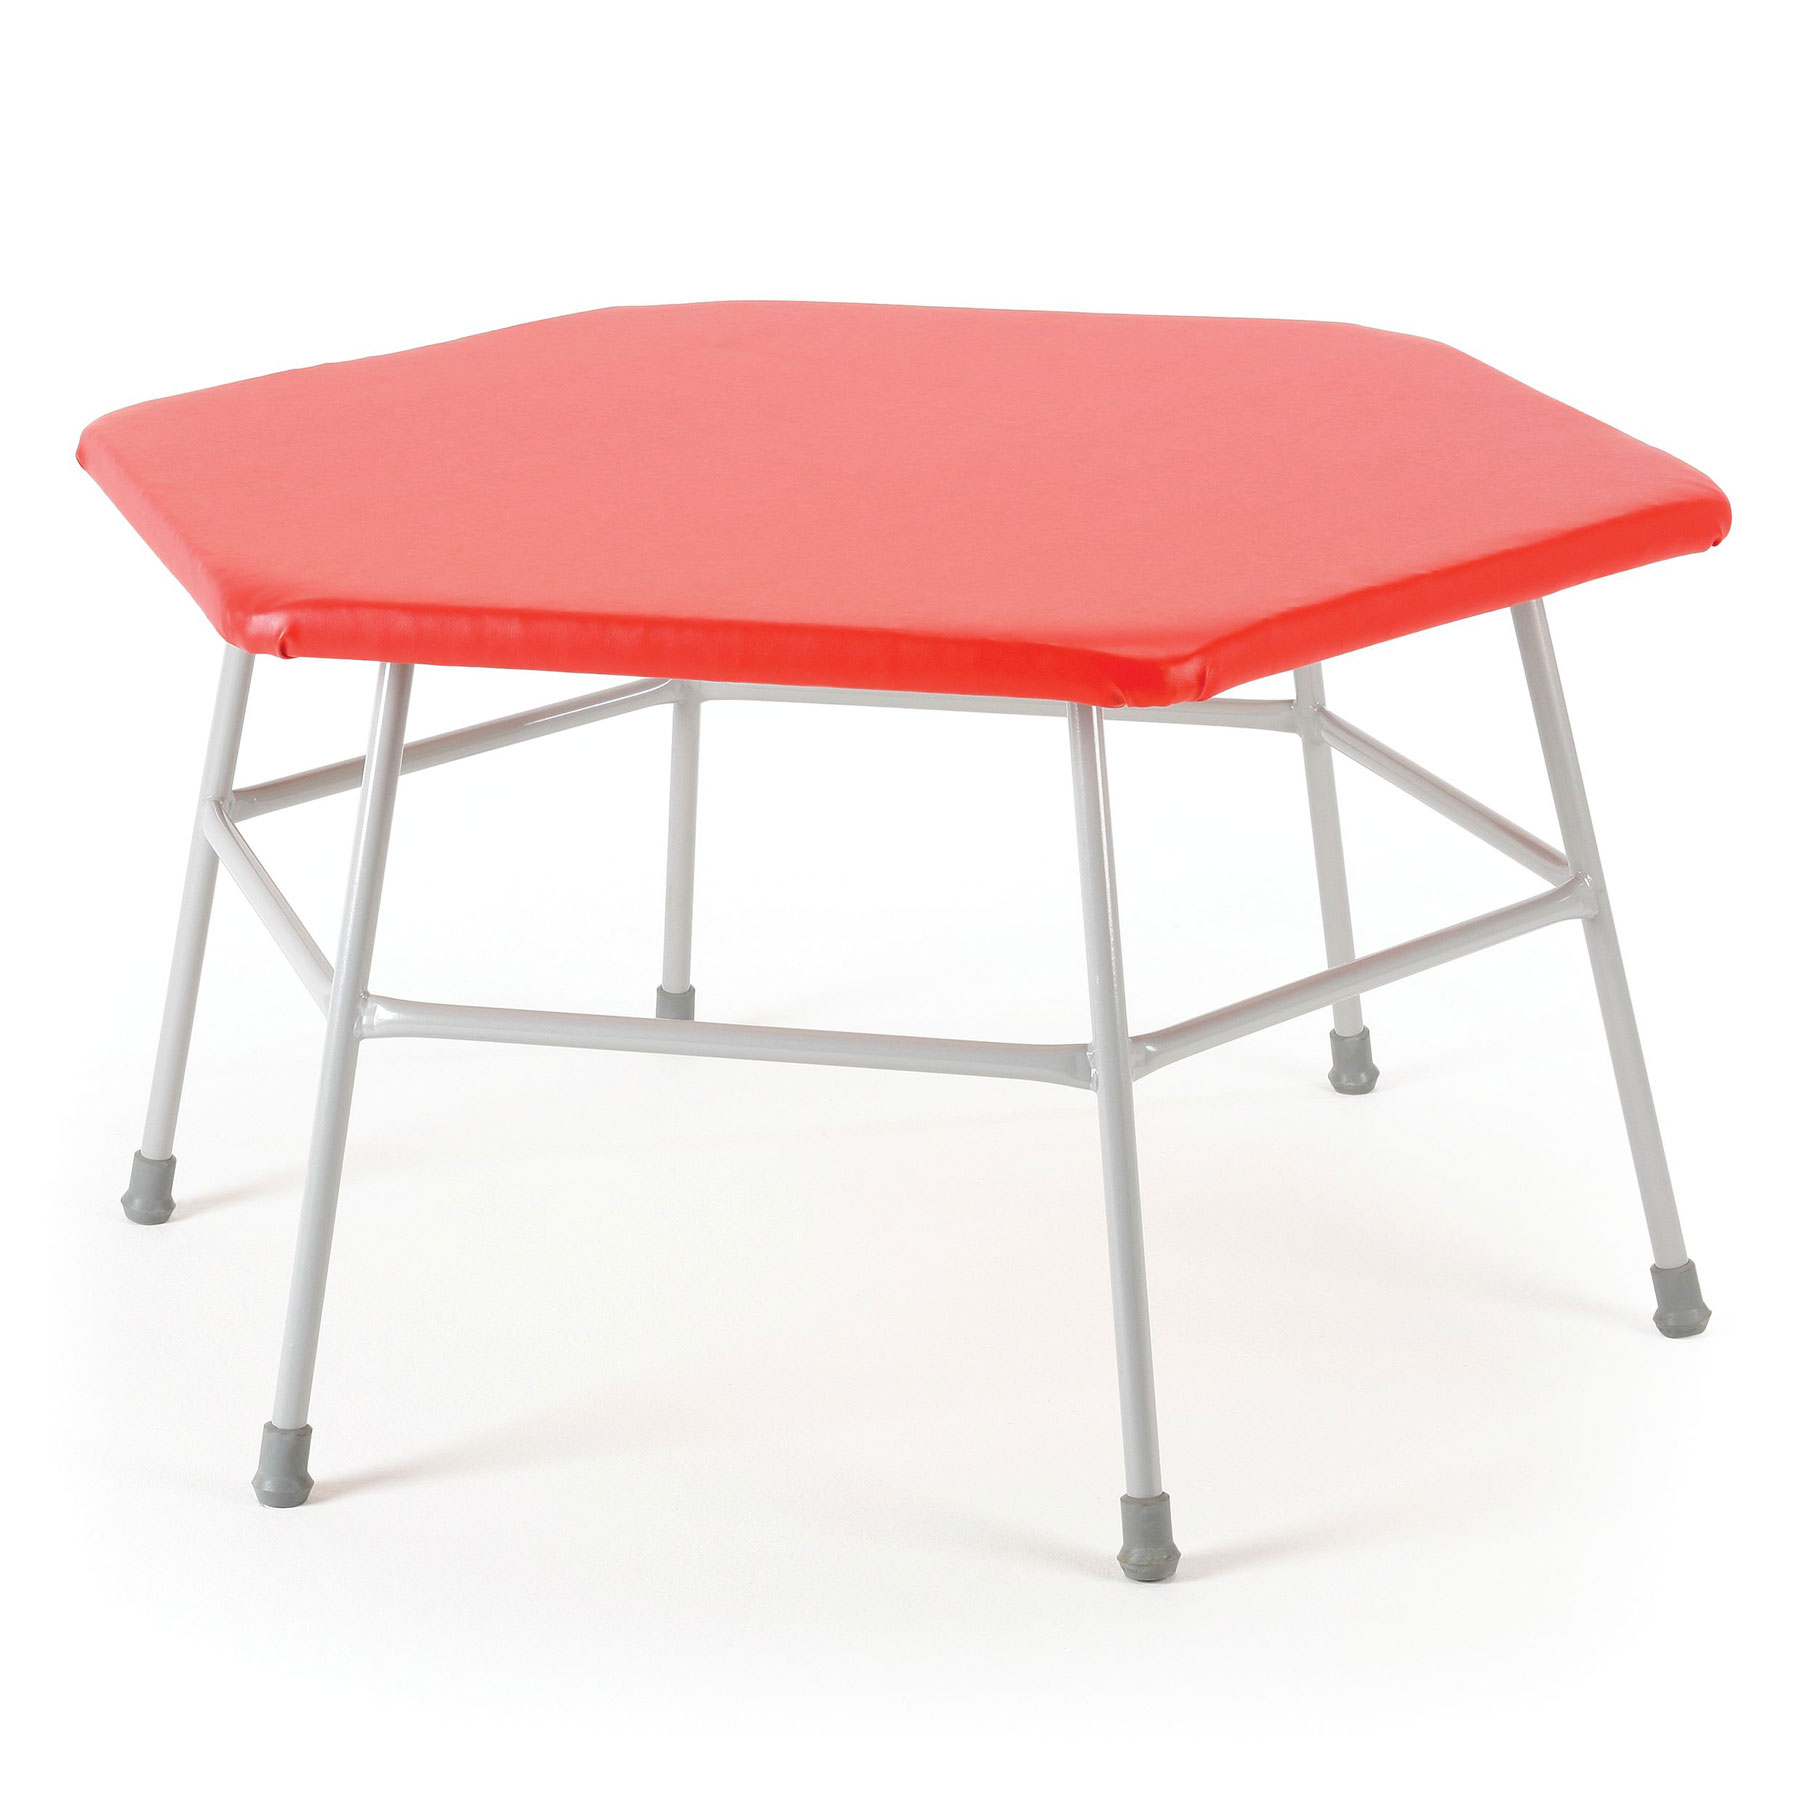 Padded Hexagonal Movement Table 600mm High, Red Top